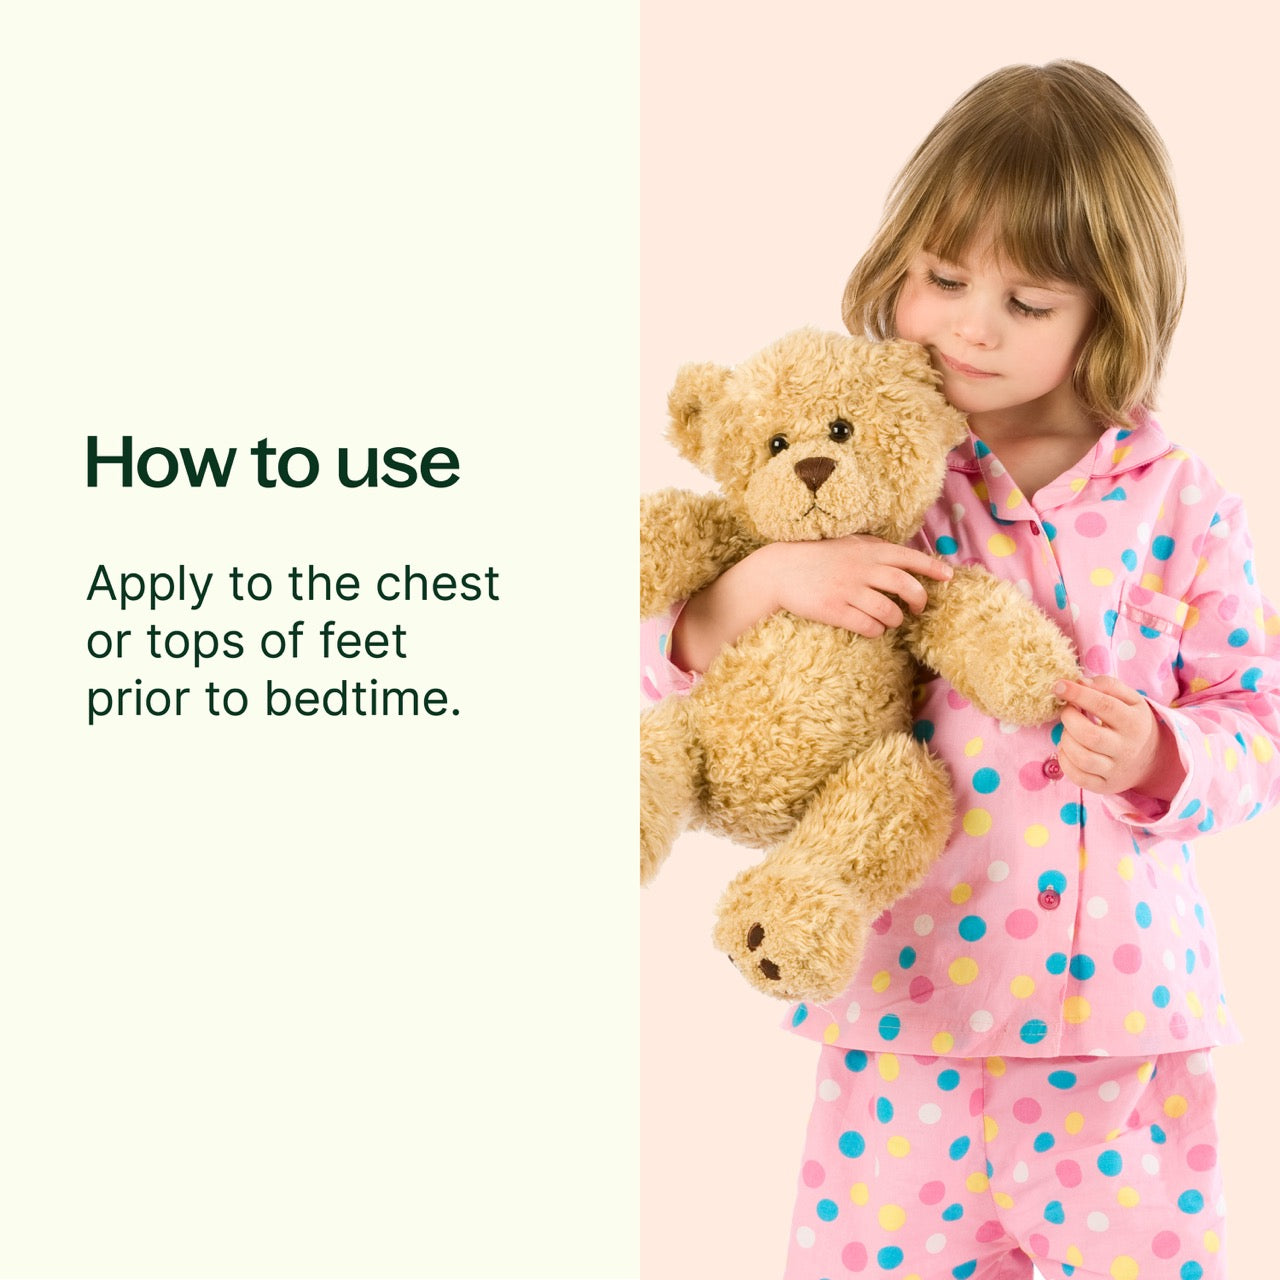 Nighty Night KidSafe Essential Oil Pre-Diluted Roll-On How to Use: Apply to the chest or tops of feet prior to bedtime.